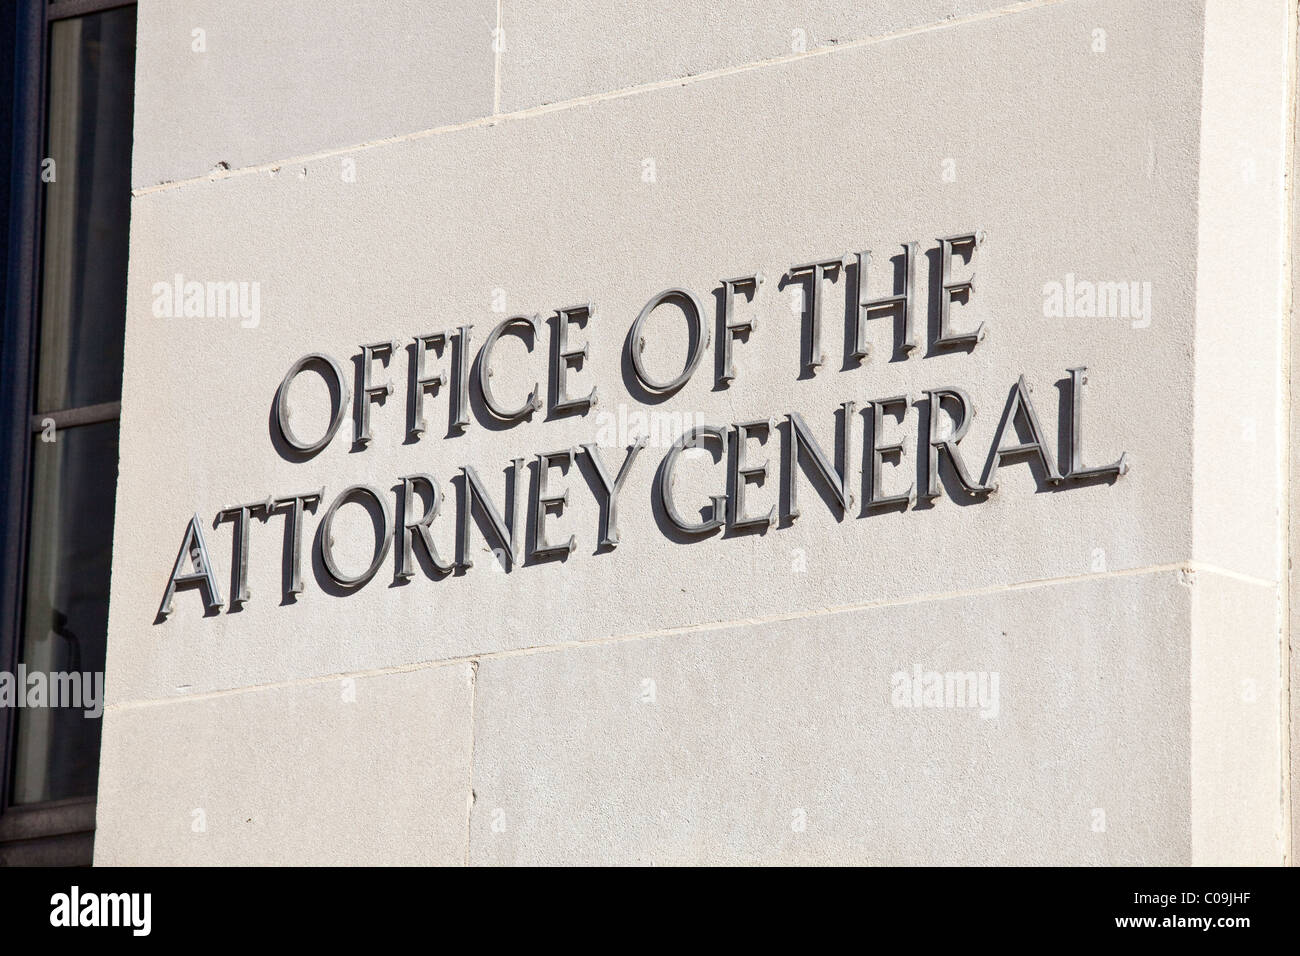 Office of the Attorney General at the DOJ Building, Washington DC Stock Photo